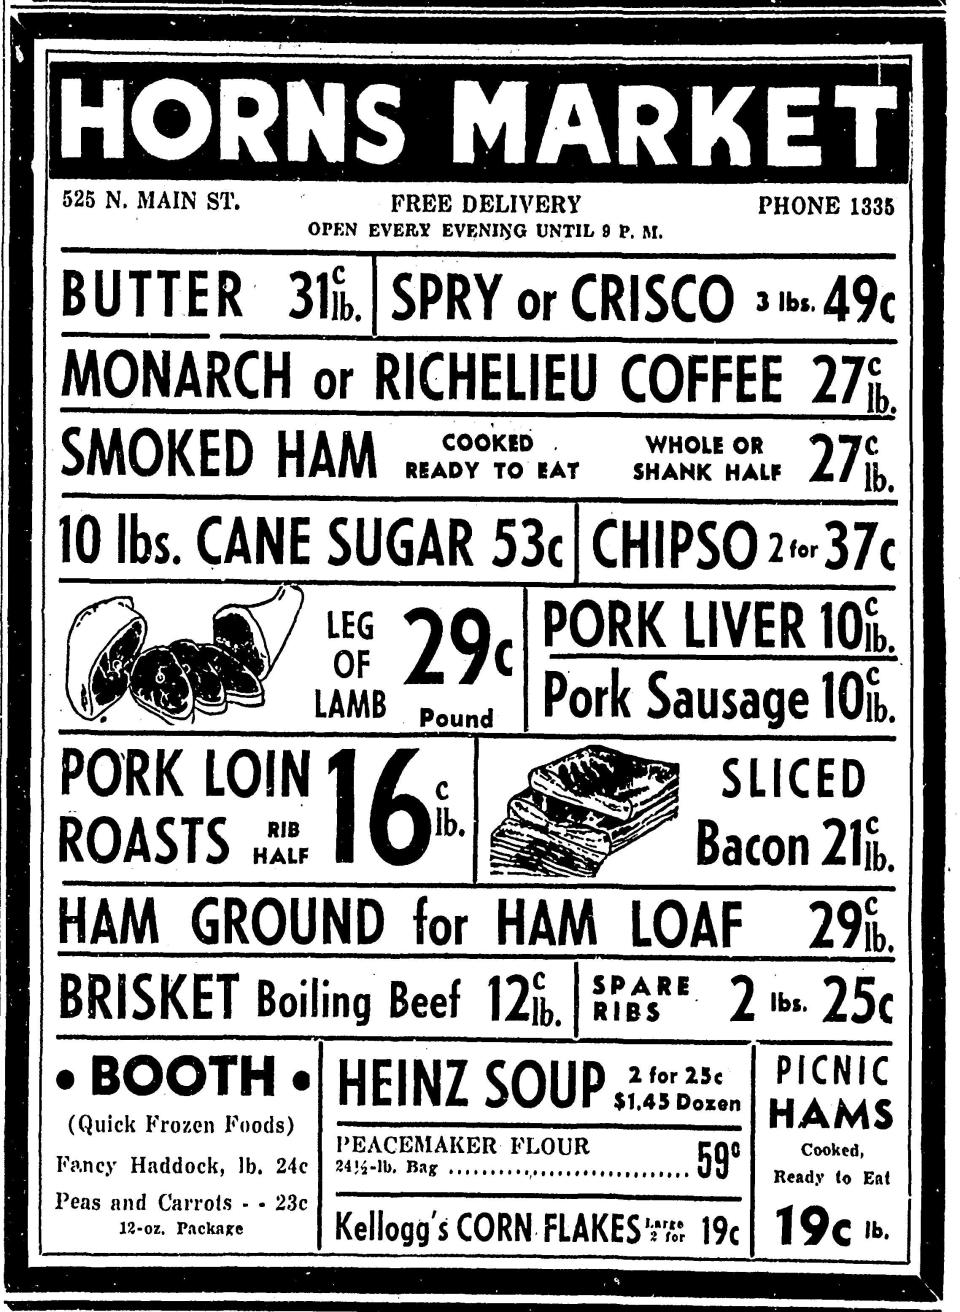 This advertisement from The Daily Telegram in the 1940s shows the prices our parents and grandparents paid for items, when wages averaged about $1,000 per year.